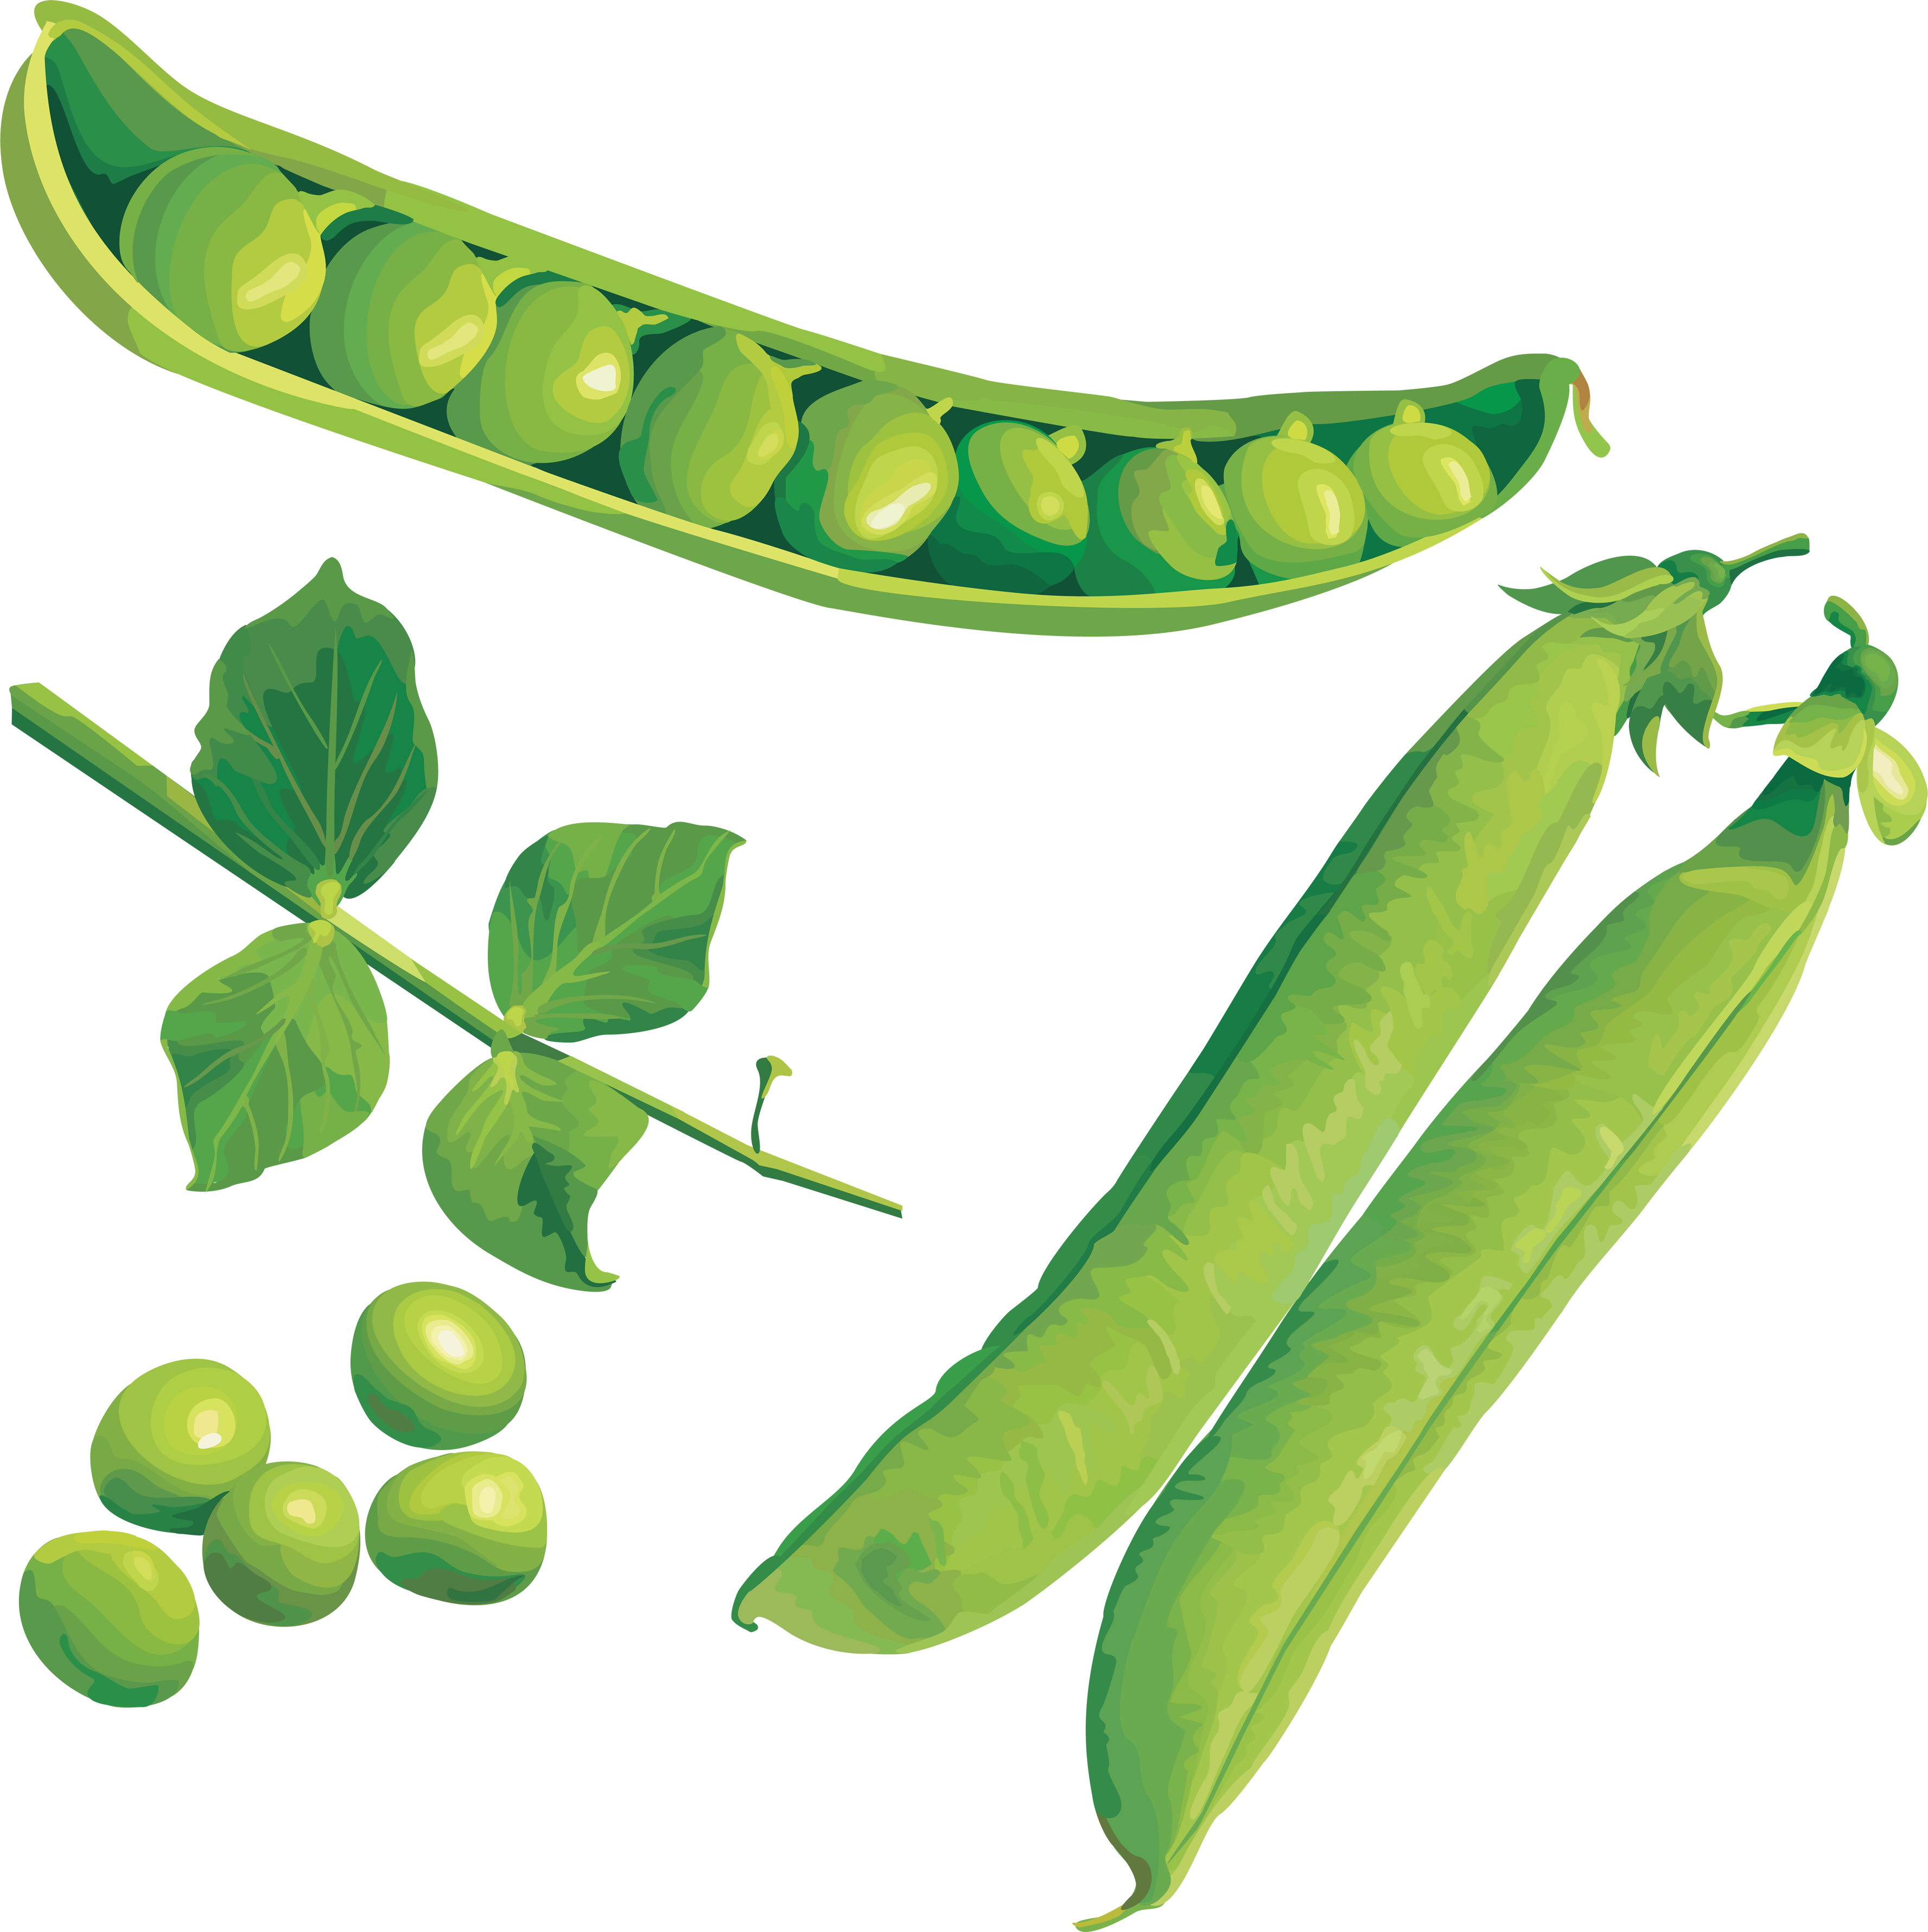 Peas clipart winter. Pea png 